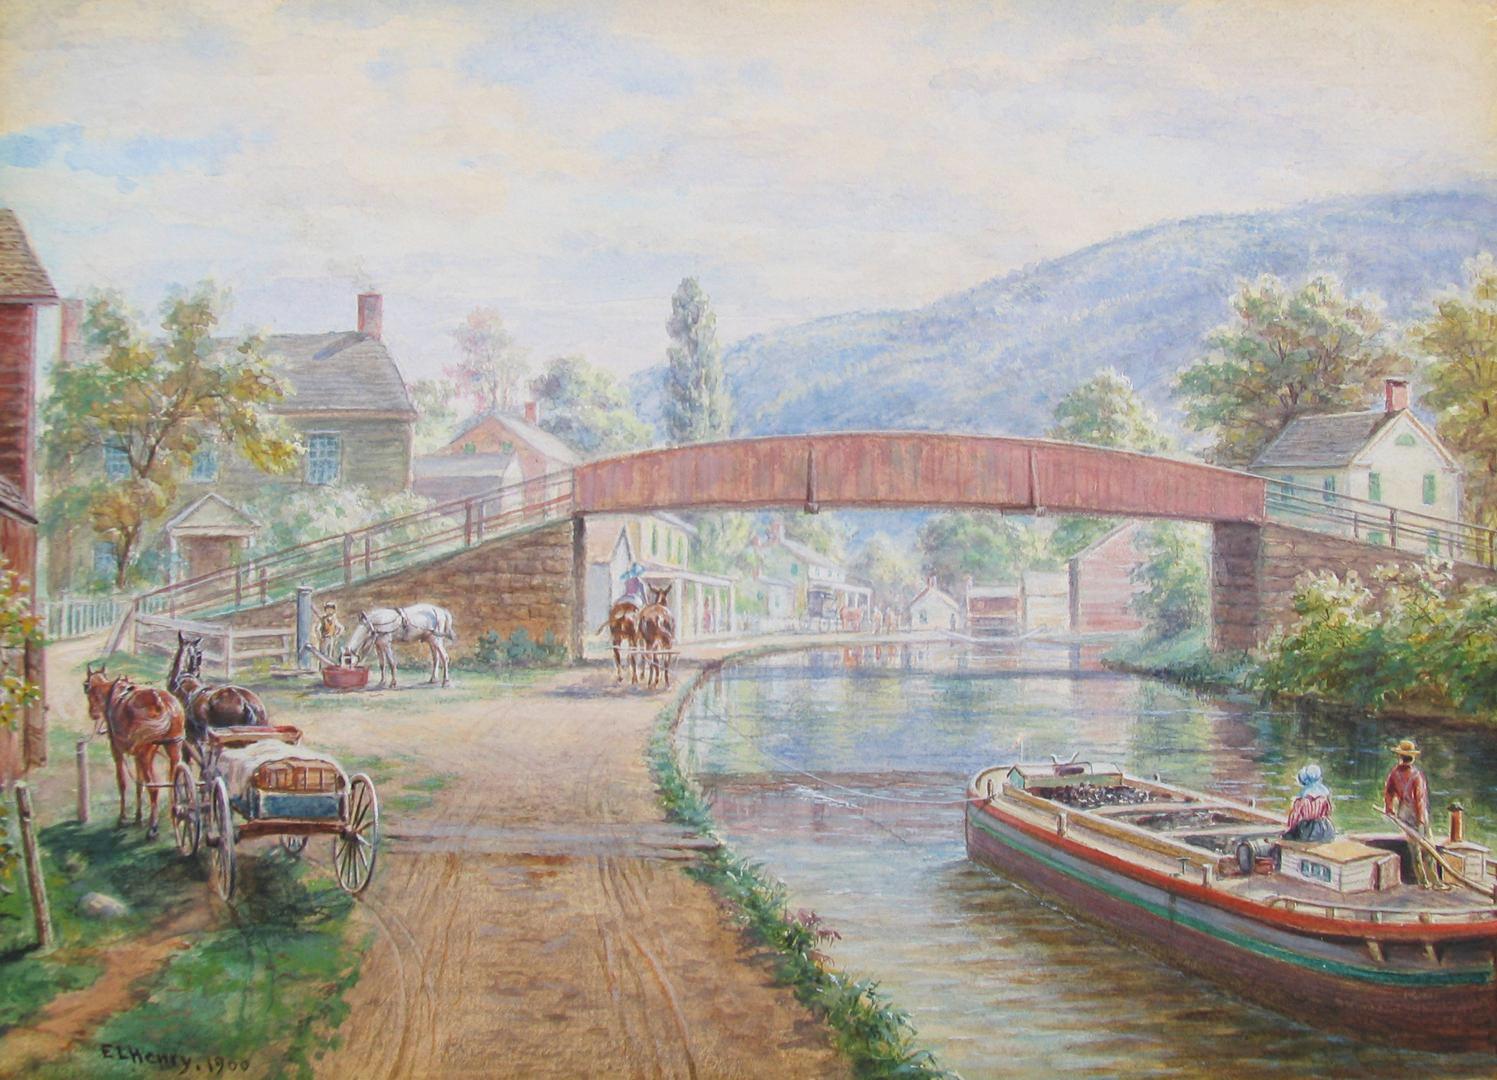 Delaware & Hudson Canal, Ellenville NY watercolor by Edward Lamson Henry For Sale 1